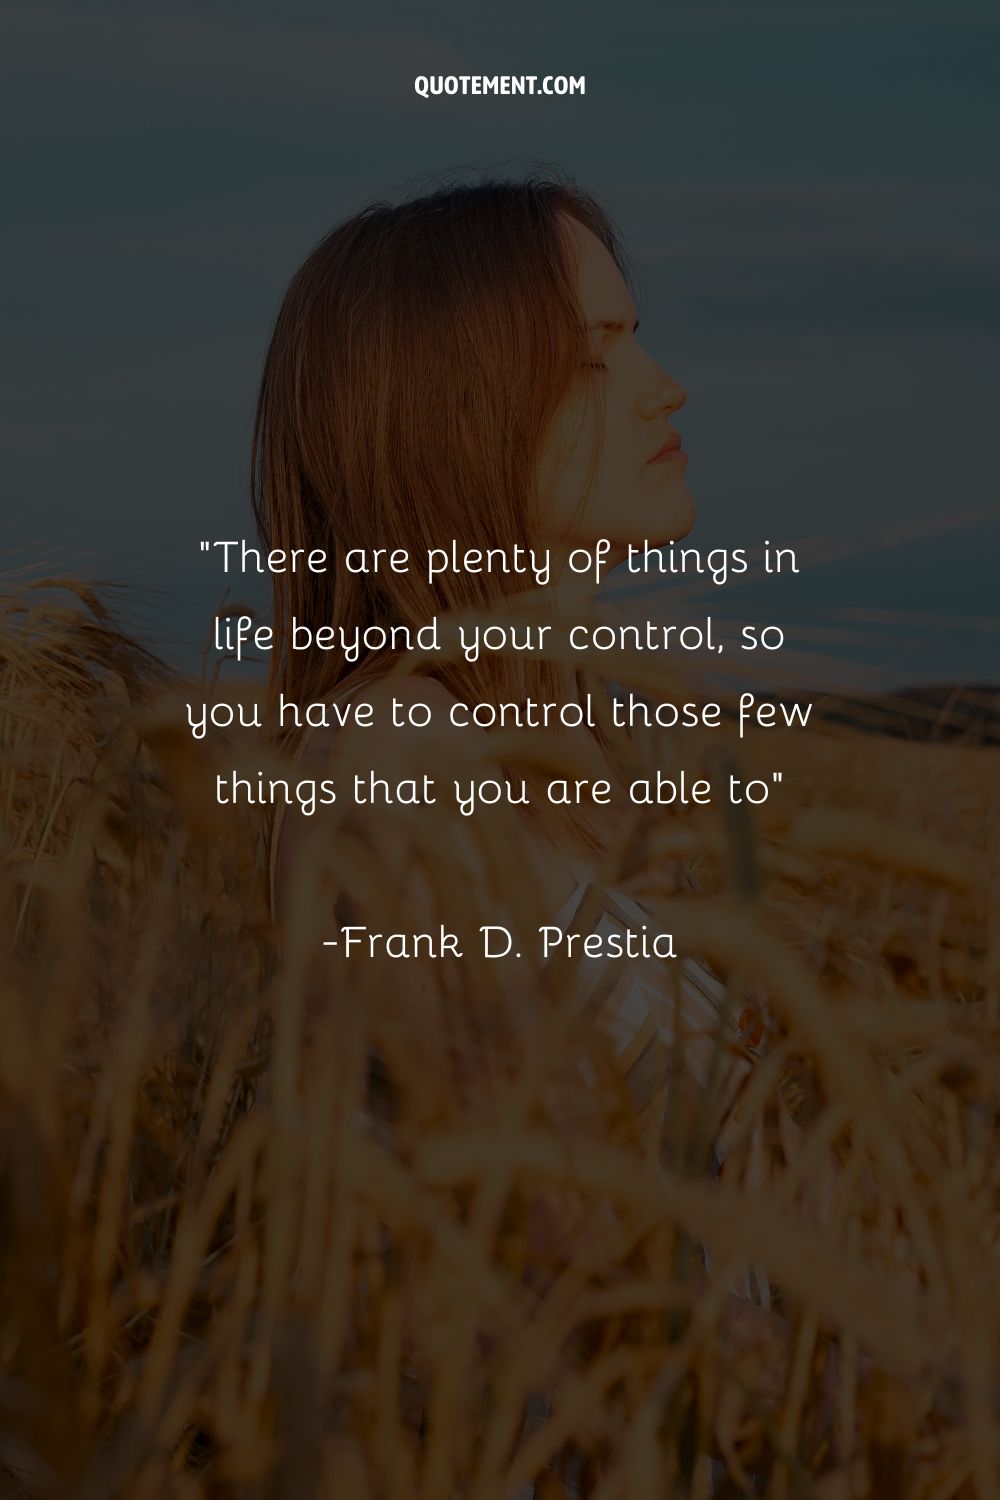 There are plenty of things in life beyond your control, so you have to control those few things that you are able to